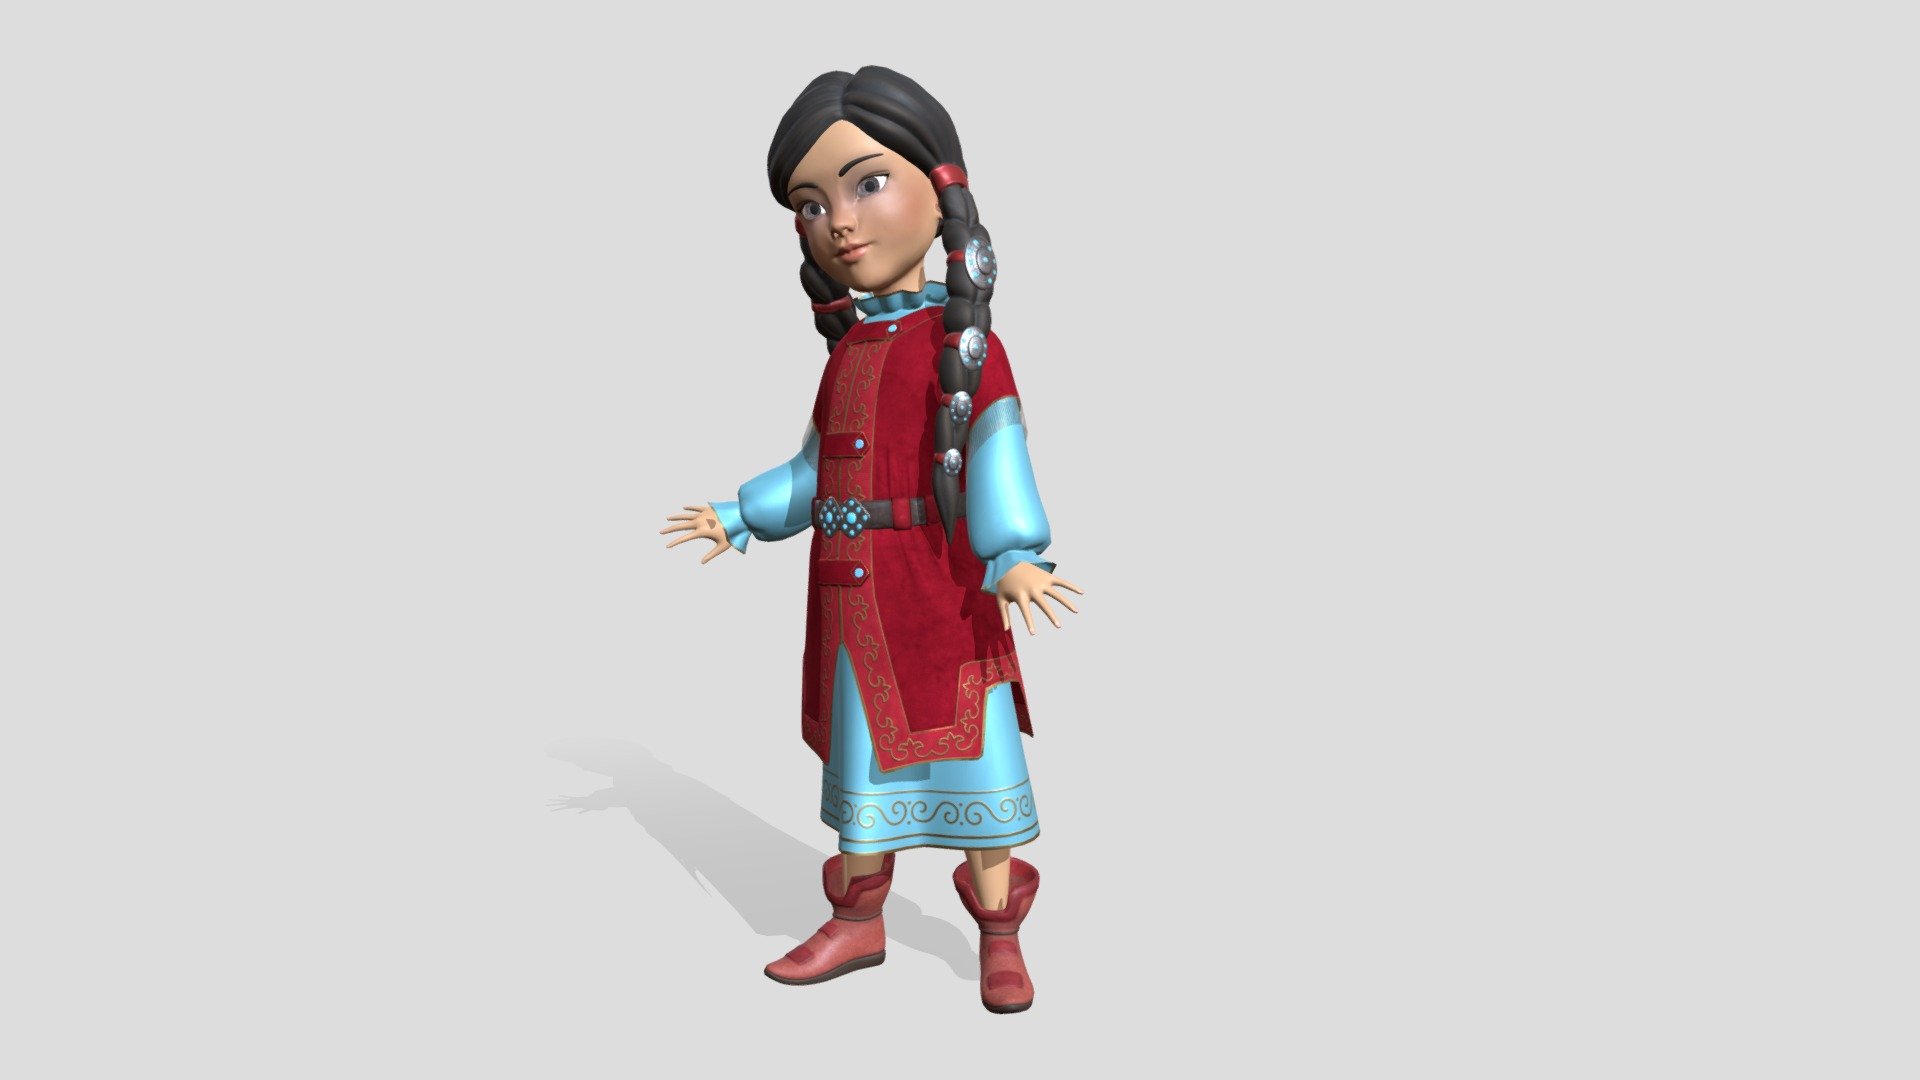 This is my first experience in creation a lowpoly character model from a hipoly model. 
The Little girl wearing festive clothing - kazakh traditional costume - a velvet jacket with pattern embroidered with gold threads, a silk dress with similar pattern, leather boots, a leather belt, a silver belt buckle, silk ribbons with silver decorations for braids

Kazakh cultural heritage is reflected in its national dress. Life on the steppe and various nomadic religious beliefs influenced traditional Kazakh clothing—it was practical in that it protected from the cold and windy weather, was comfortable to wear on horseback, and was also made of natural materials. The quality of clothes and their individual elements also made it possible to ascertain the social status of a Kazakh and the family or clan to which he belonged. Traditionally, poorer people wore clothes made from the skins of wild animals while the rich sometimes made theirs from imported materials such as silk and velvet 3d model